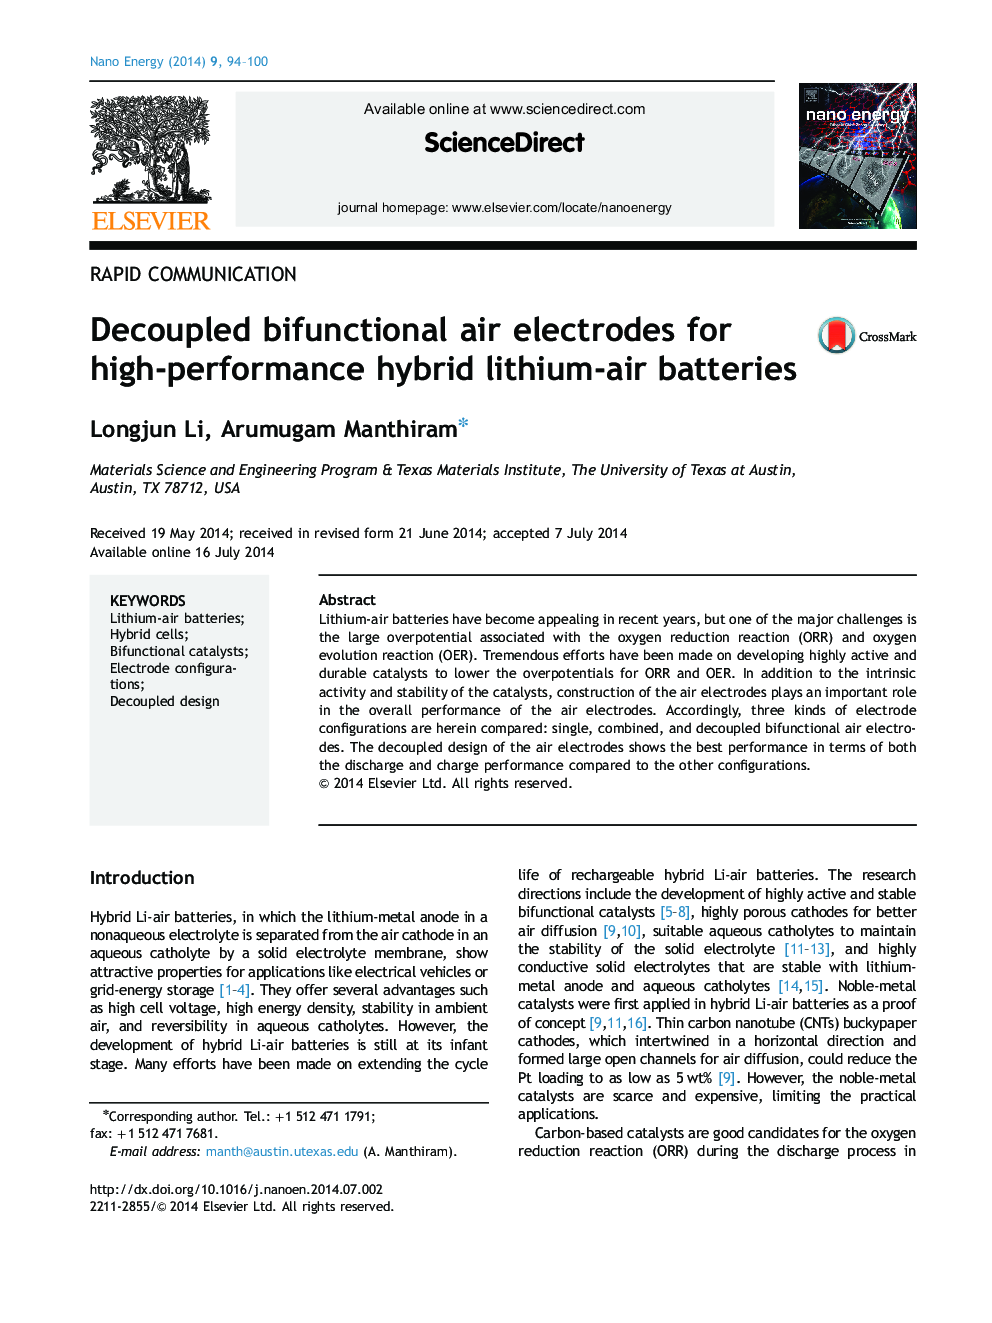 Decoupled bifunctional air electrodes for high-performance hybrid lithium-air batteries